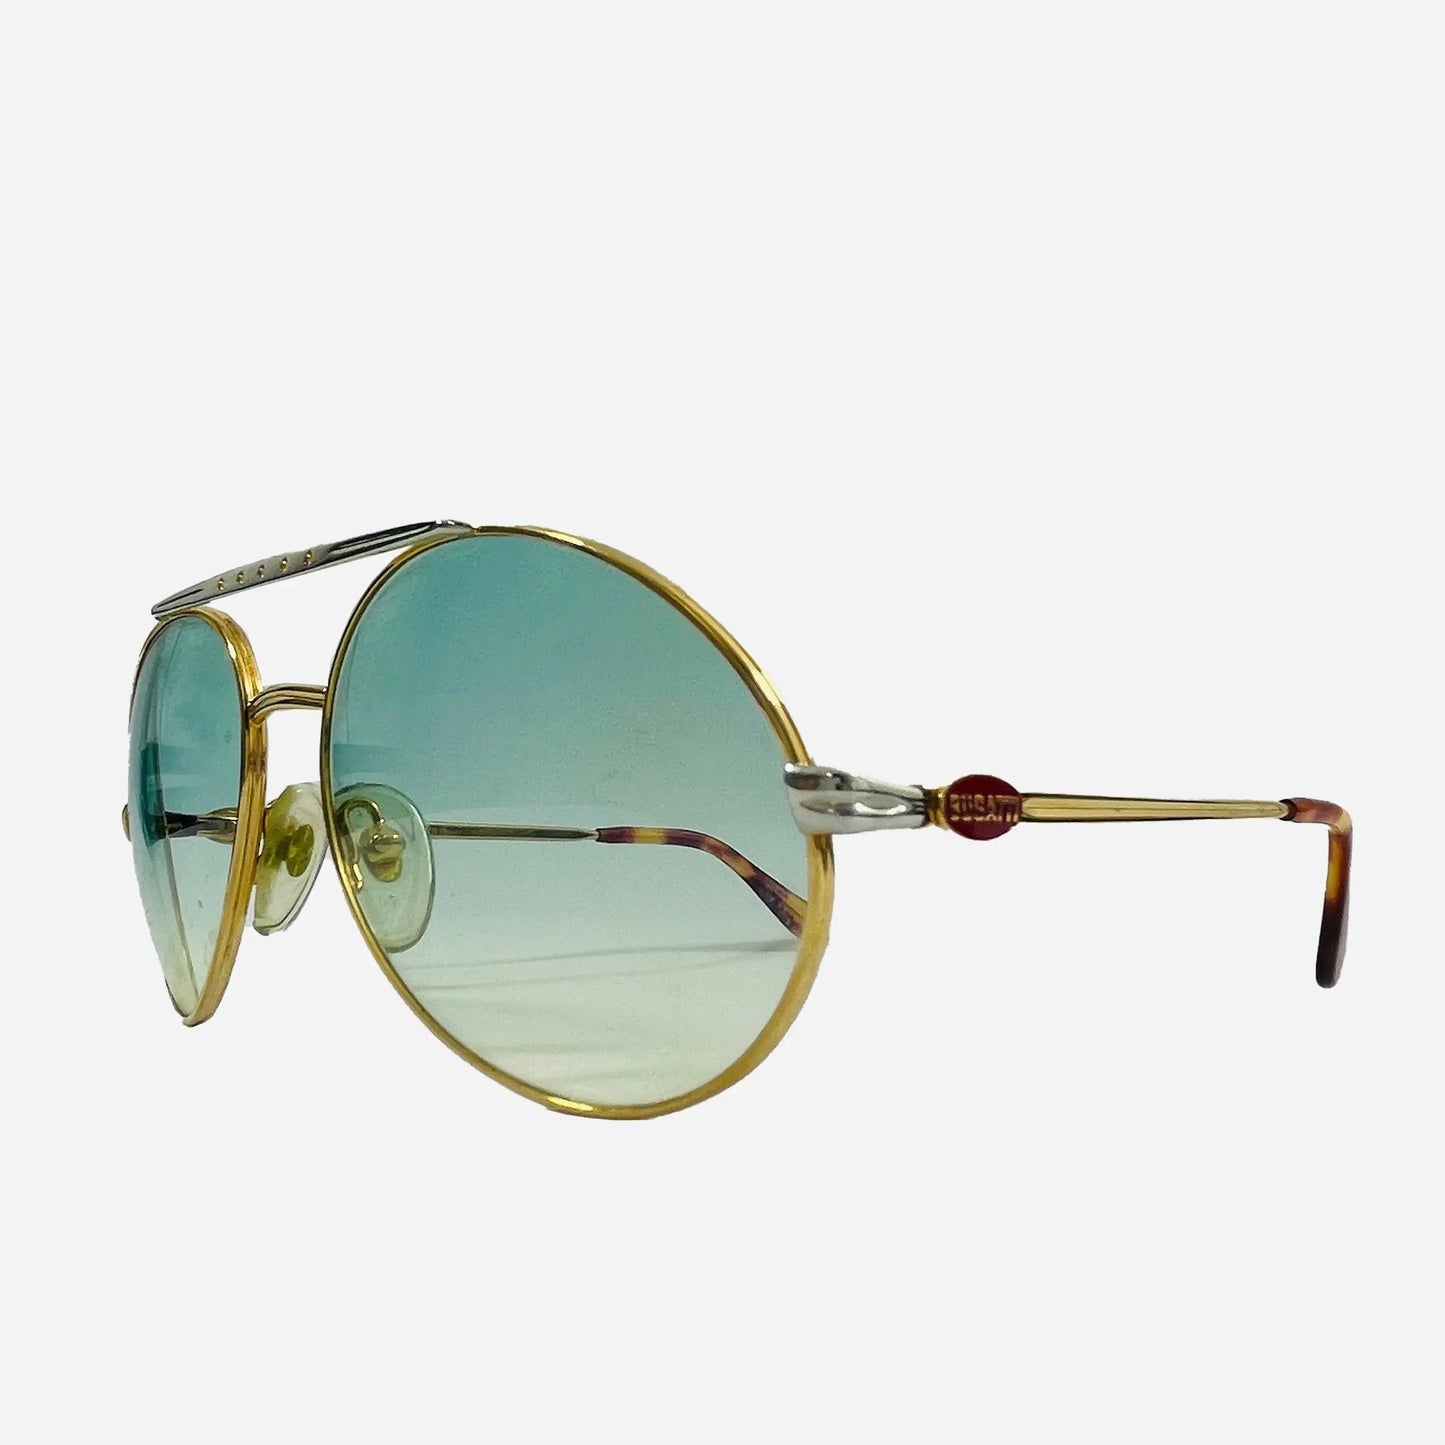 Ettore-Bugatti-Sonnenbrille-Sunglasses-Gold-Plated-14CT-the-seekers-front-side